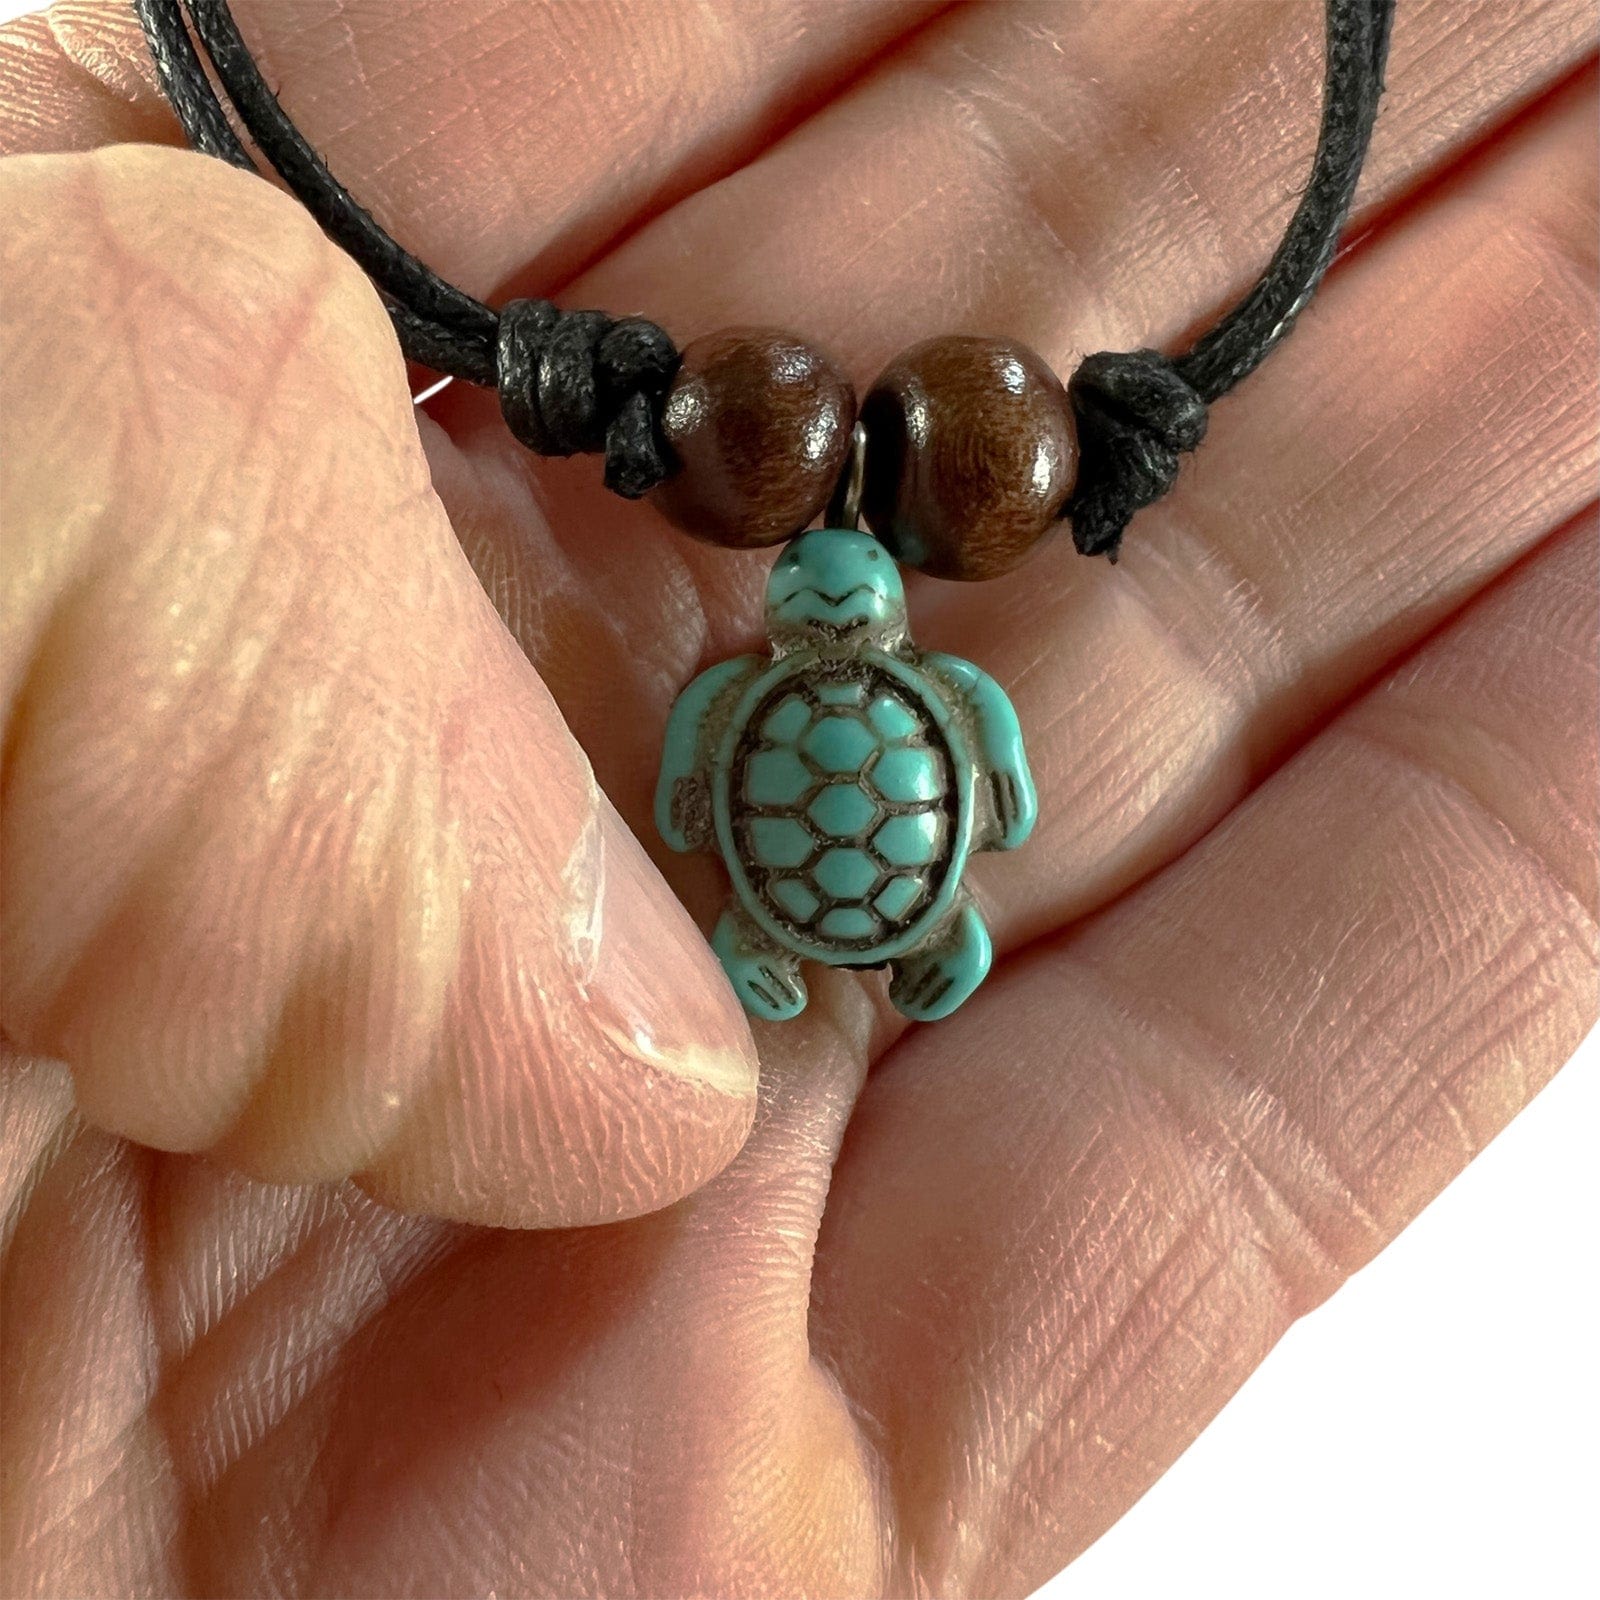 Turquoise Turtle Pendant Bead Black Cord Chain Necklace Beach Surfer Jewellery